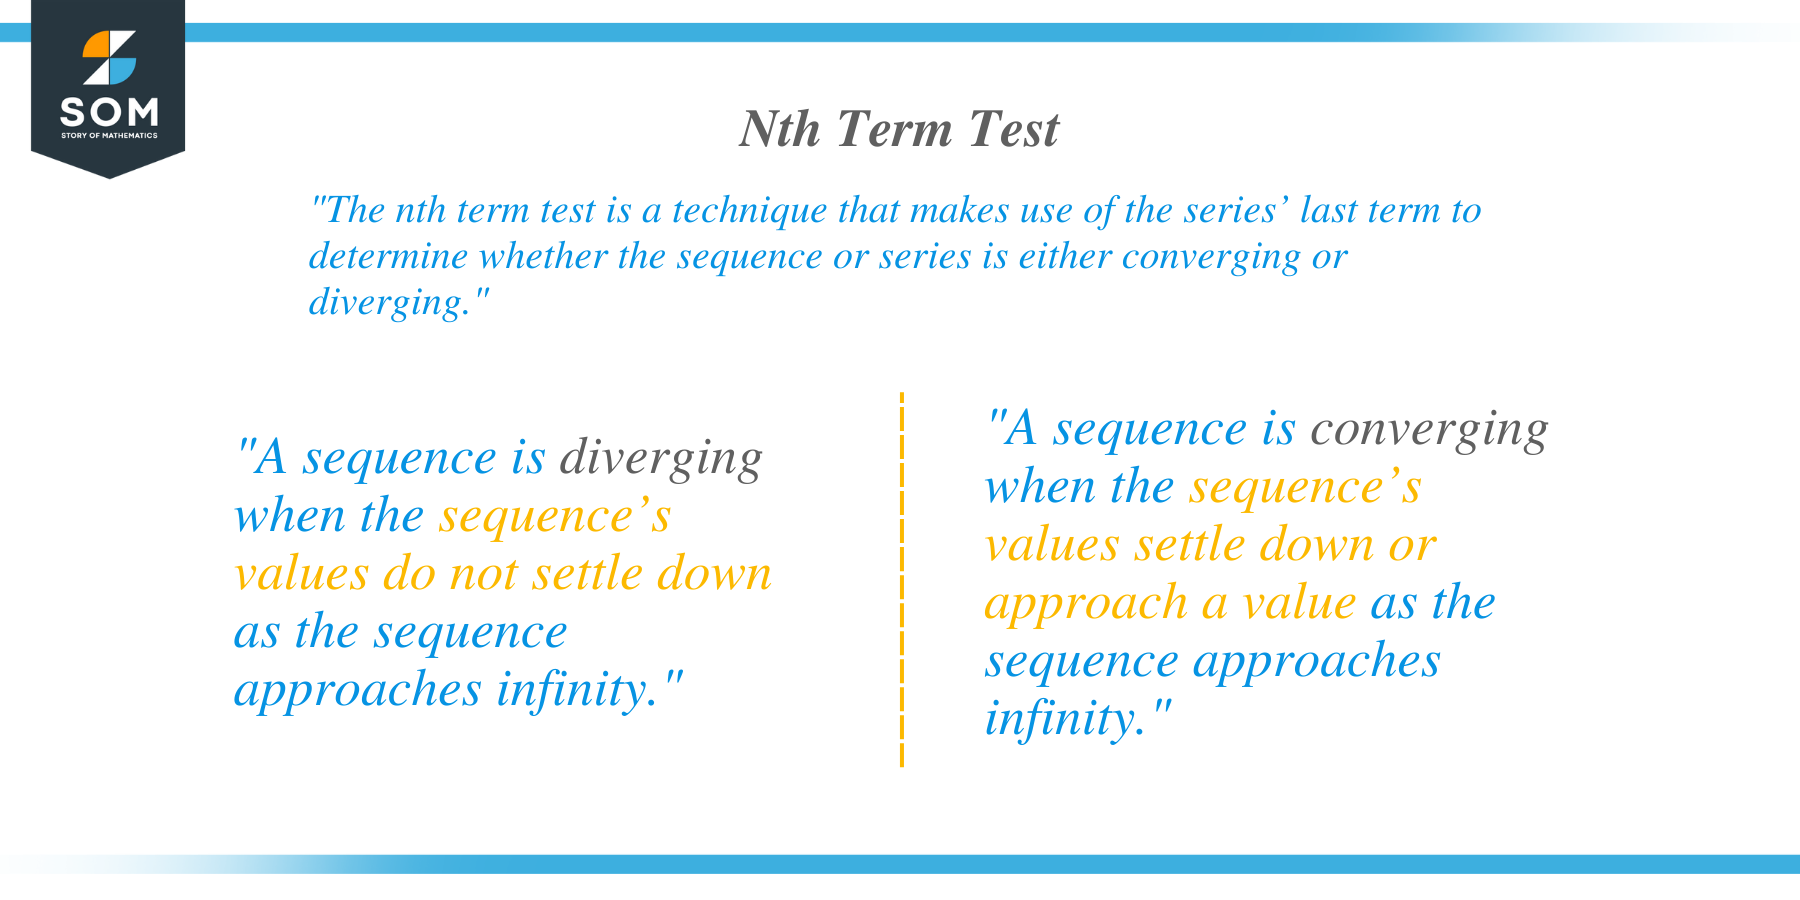 What is the nth term test?  